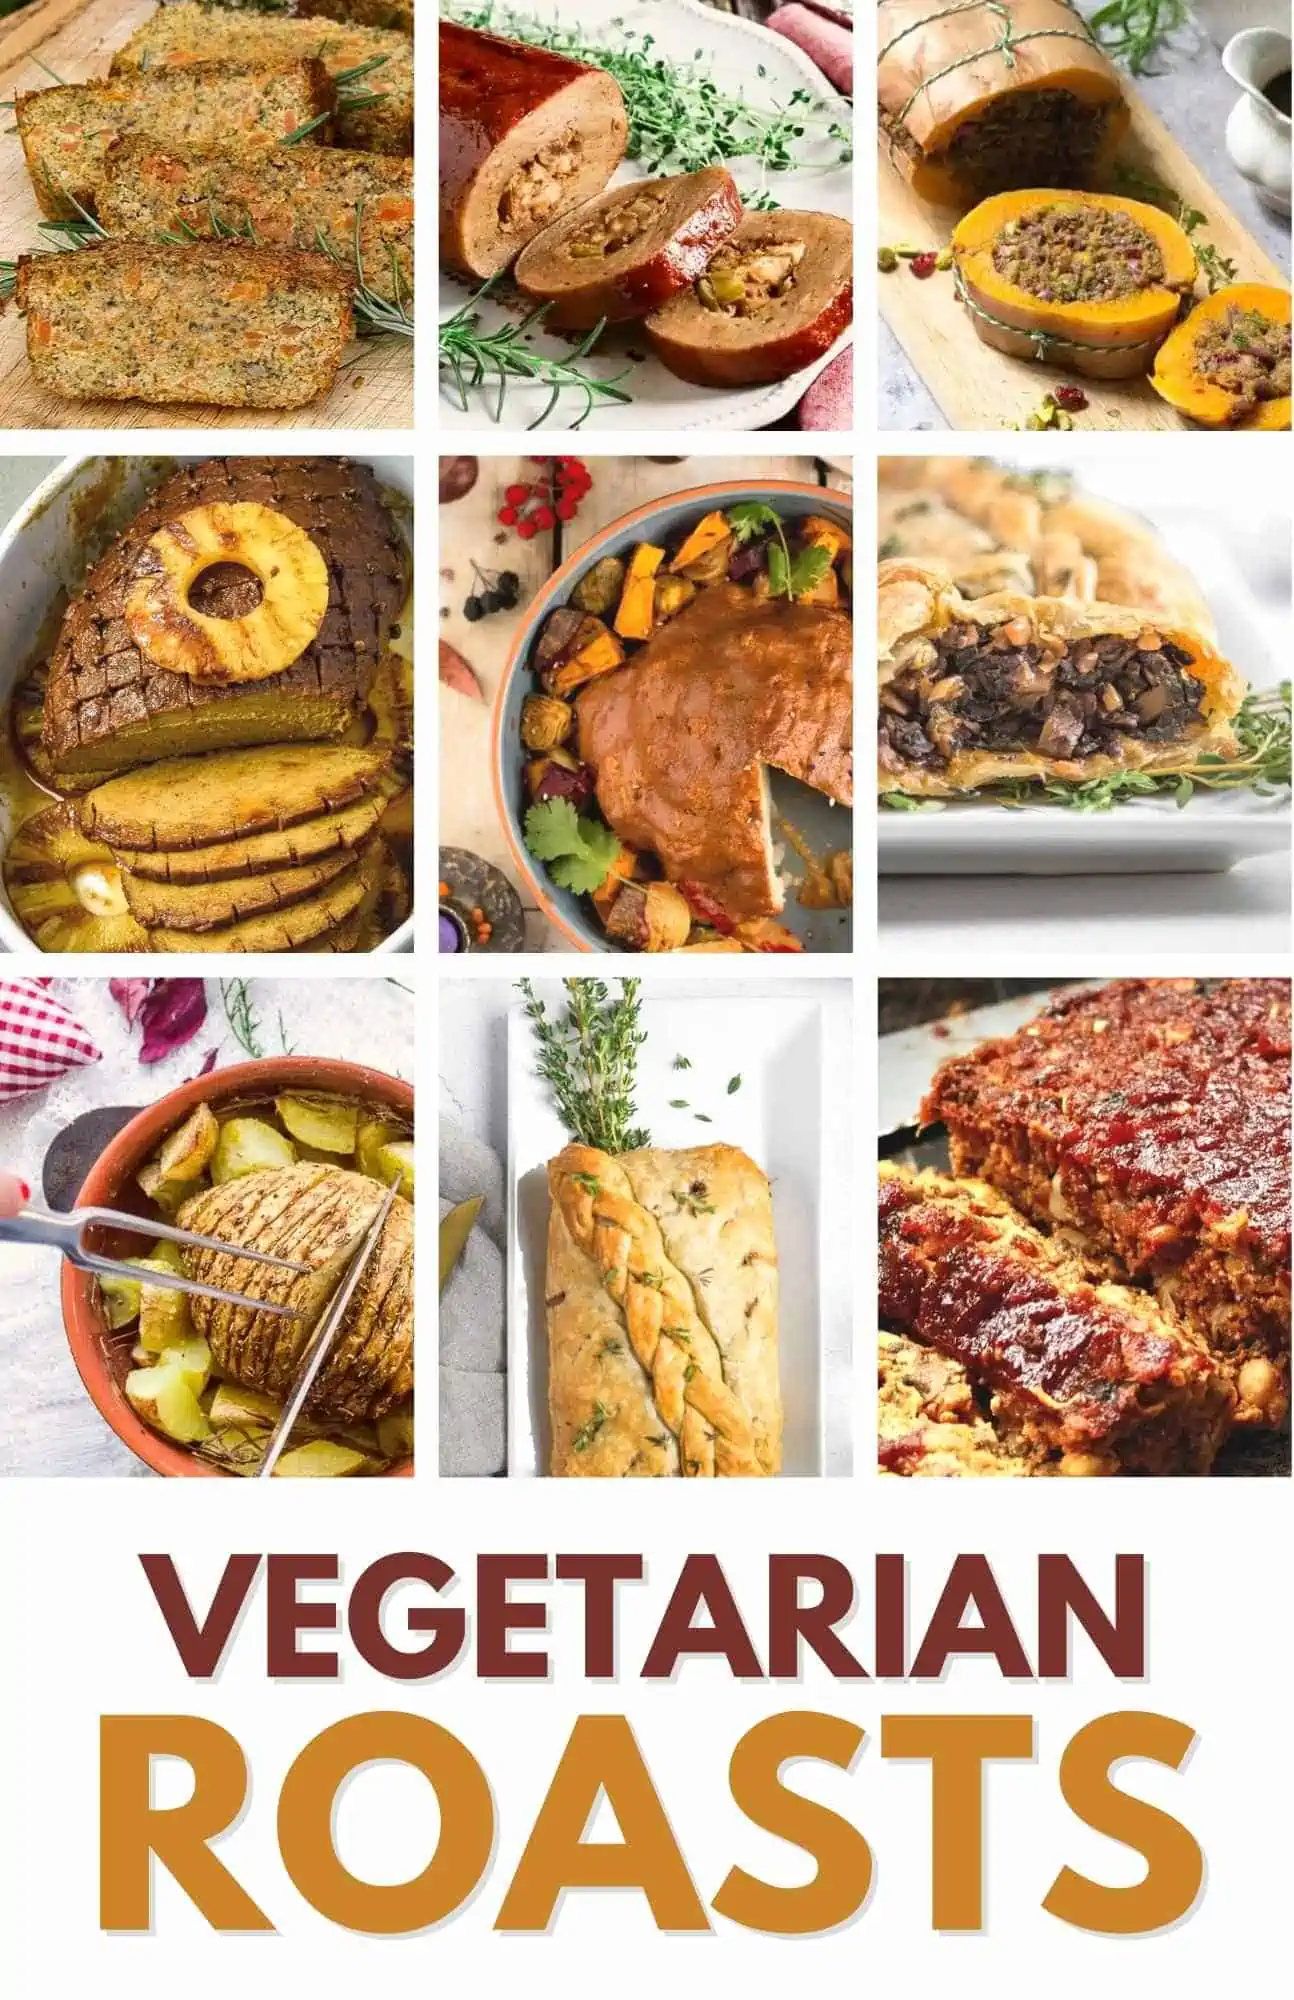 Best Vegetarian Roast Dinner Recipes that are Plant-Based and Vegan